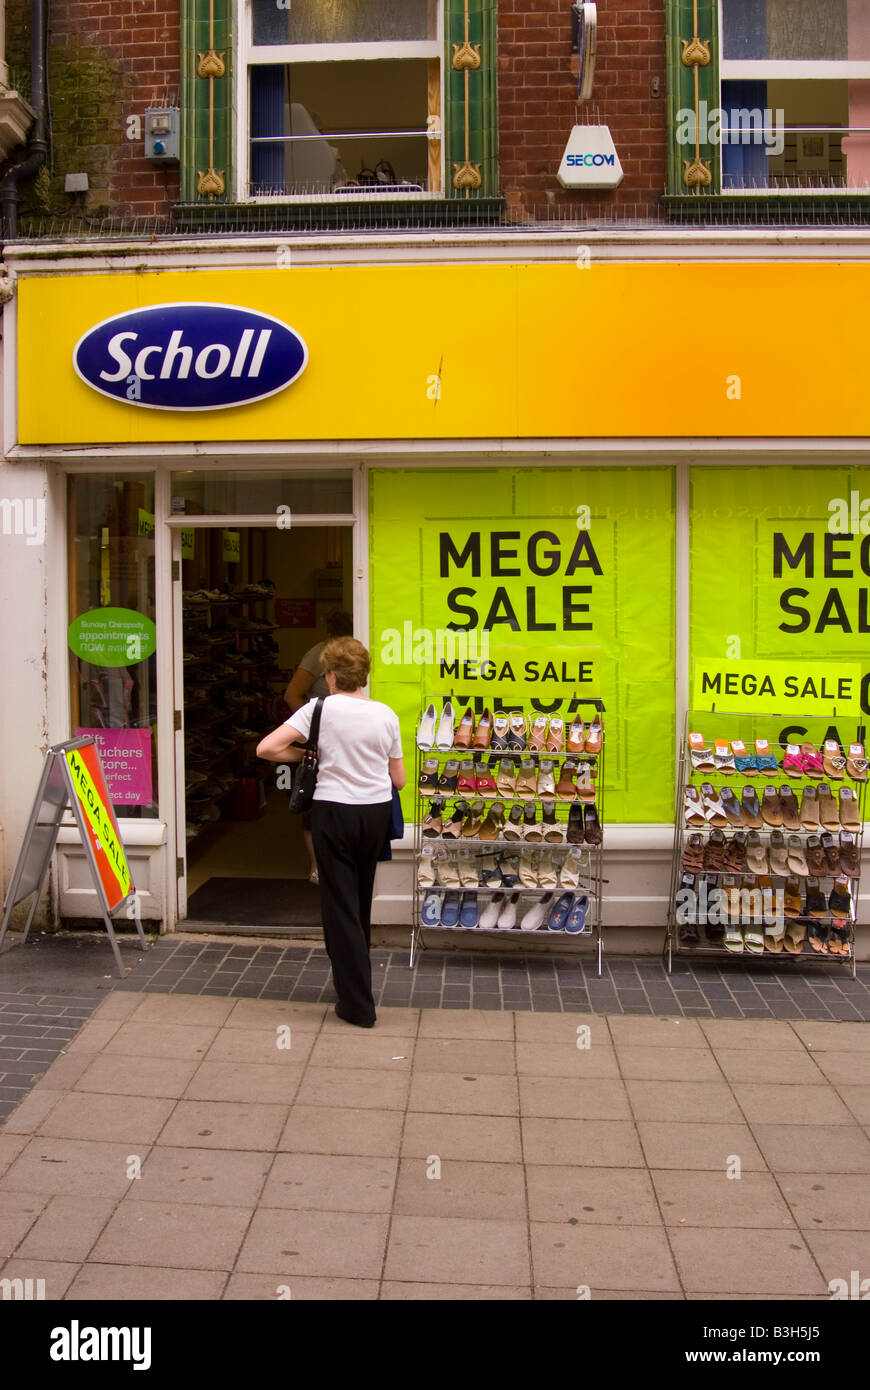 scholl shoes store